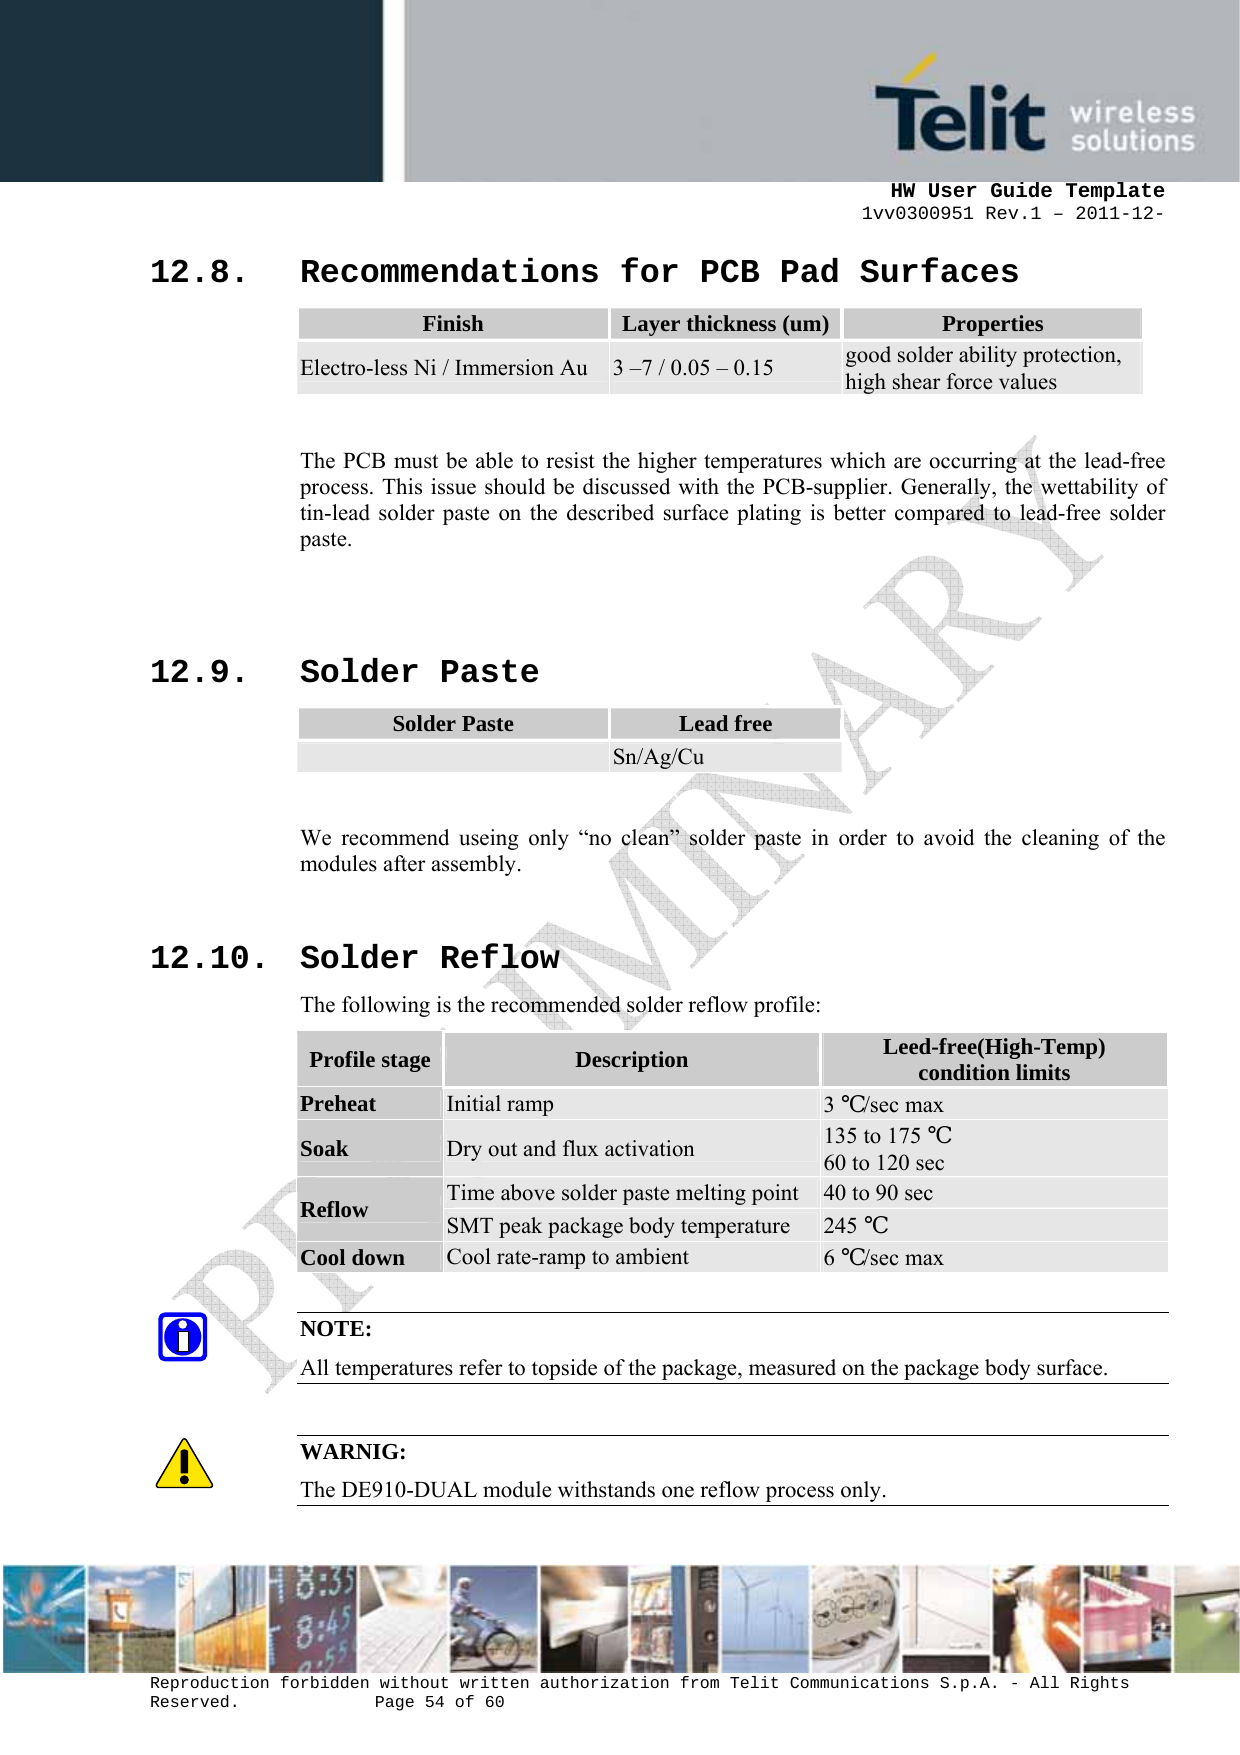      HW User Guide Template 1vv0300951 Rev.1 – 2011-12-  Reproduction forbidden without written authorization from Telit Communications S.p.A. - All Rights Reserved.    Page 54 of 60                                                     12.8. Recommendations for PCB Pad Surfaces Finish  Layer thickness (um) Properties Electro-less Ni / Immersion Au  3 –7 / 0.05 – 0.15  good solder ability protection, high shear force values  The PCB must be able to resist the higher temperatures which are occurring at the lead-free process. This issue should be discussed with the PCB-supplier. Generally, the wettability of tin-lead solder paste on the described surface plating is better compared to lead-free solder paste.   12.9. Solder Paste Solder Paste  Lead free  Sn/Ag/Cu  We recommend useing only “no clean” solder paste in order to avoid the cleaning of the modules after assembly.  12.10. Solder Reflow The following is the recommended solder reflow profile: Profile stage  Description  Leed-free(High-Temp) condition limits Preheat Initial ramp  3 ℃/sec max Soak Dry out and flux activation  135 to 175 ℃ 60 to 120 sec Reflow Time above solder paste melting point  40 to 90 sec SMT peak package body temperature  245 ℃ Cool down Cool rate-ramp to ambient  6 ℃/sec max  NOTE: All temperatures refer to topside of the package, measured on the package body surface.  WARNIG: The DE910-DUAL module withstands one reflow process only.  